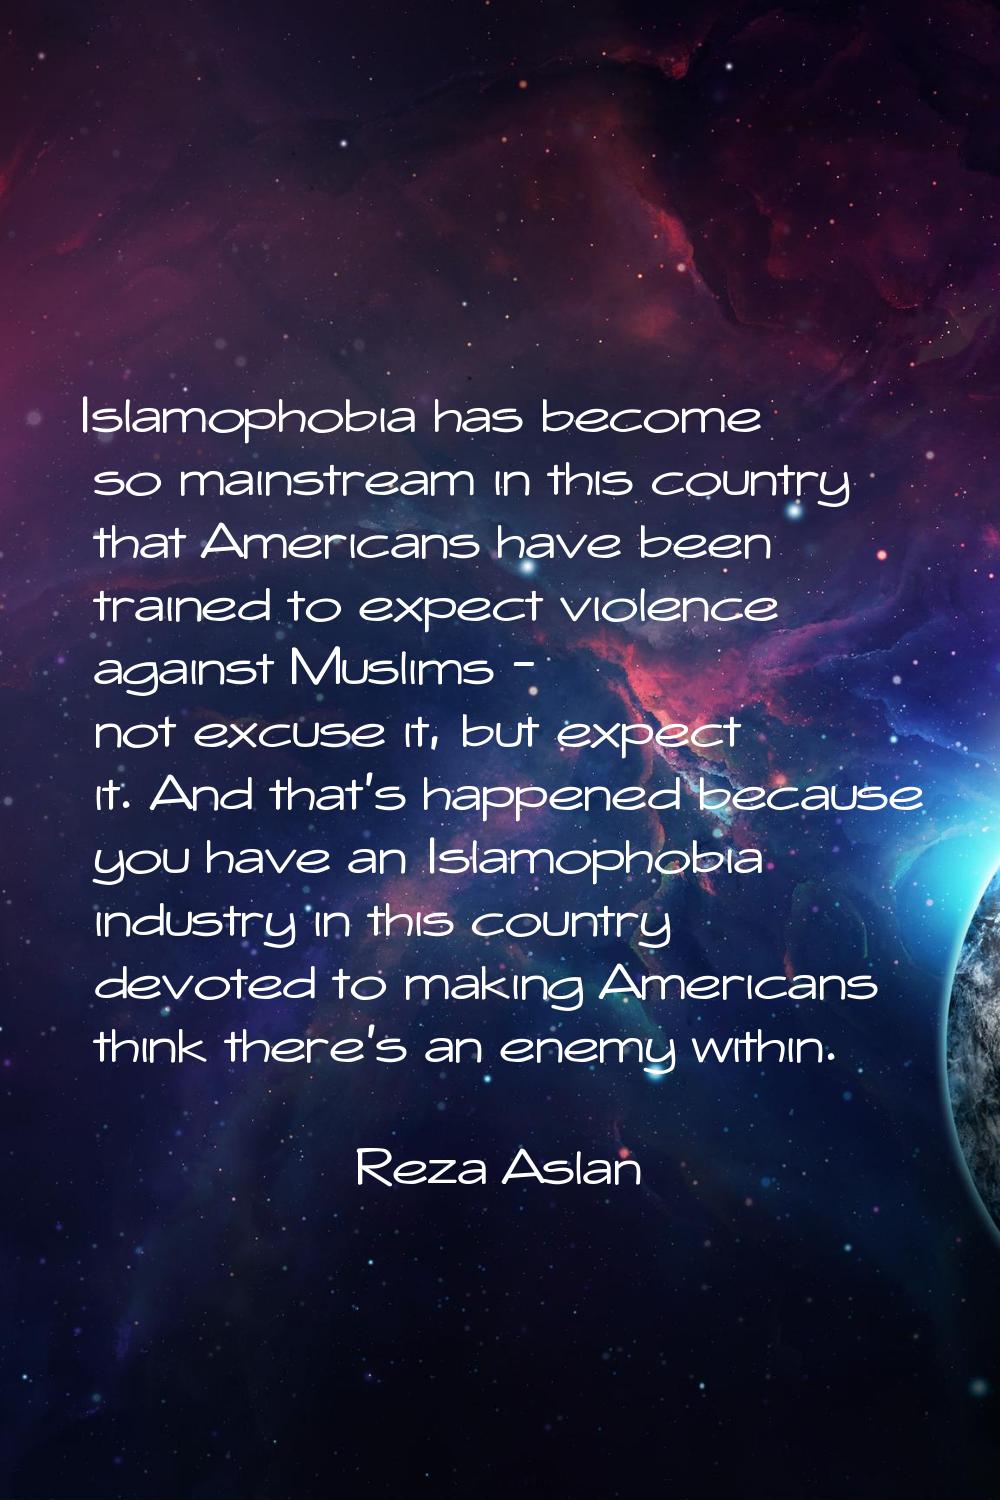 Islamophobia has become so mainstream in this country that Americans have been trained to expect vi